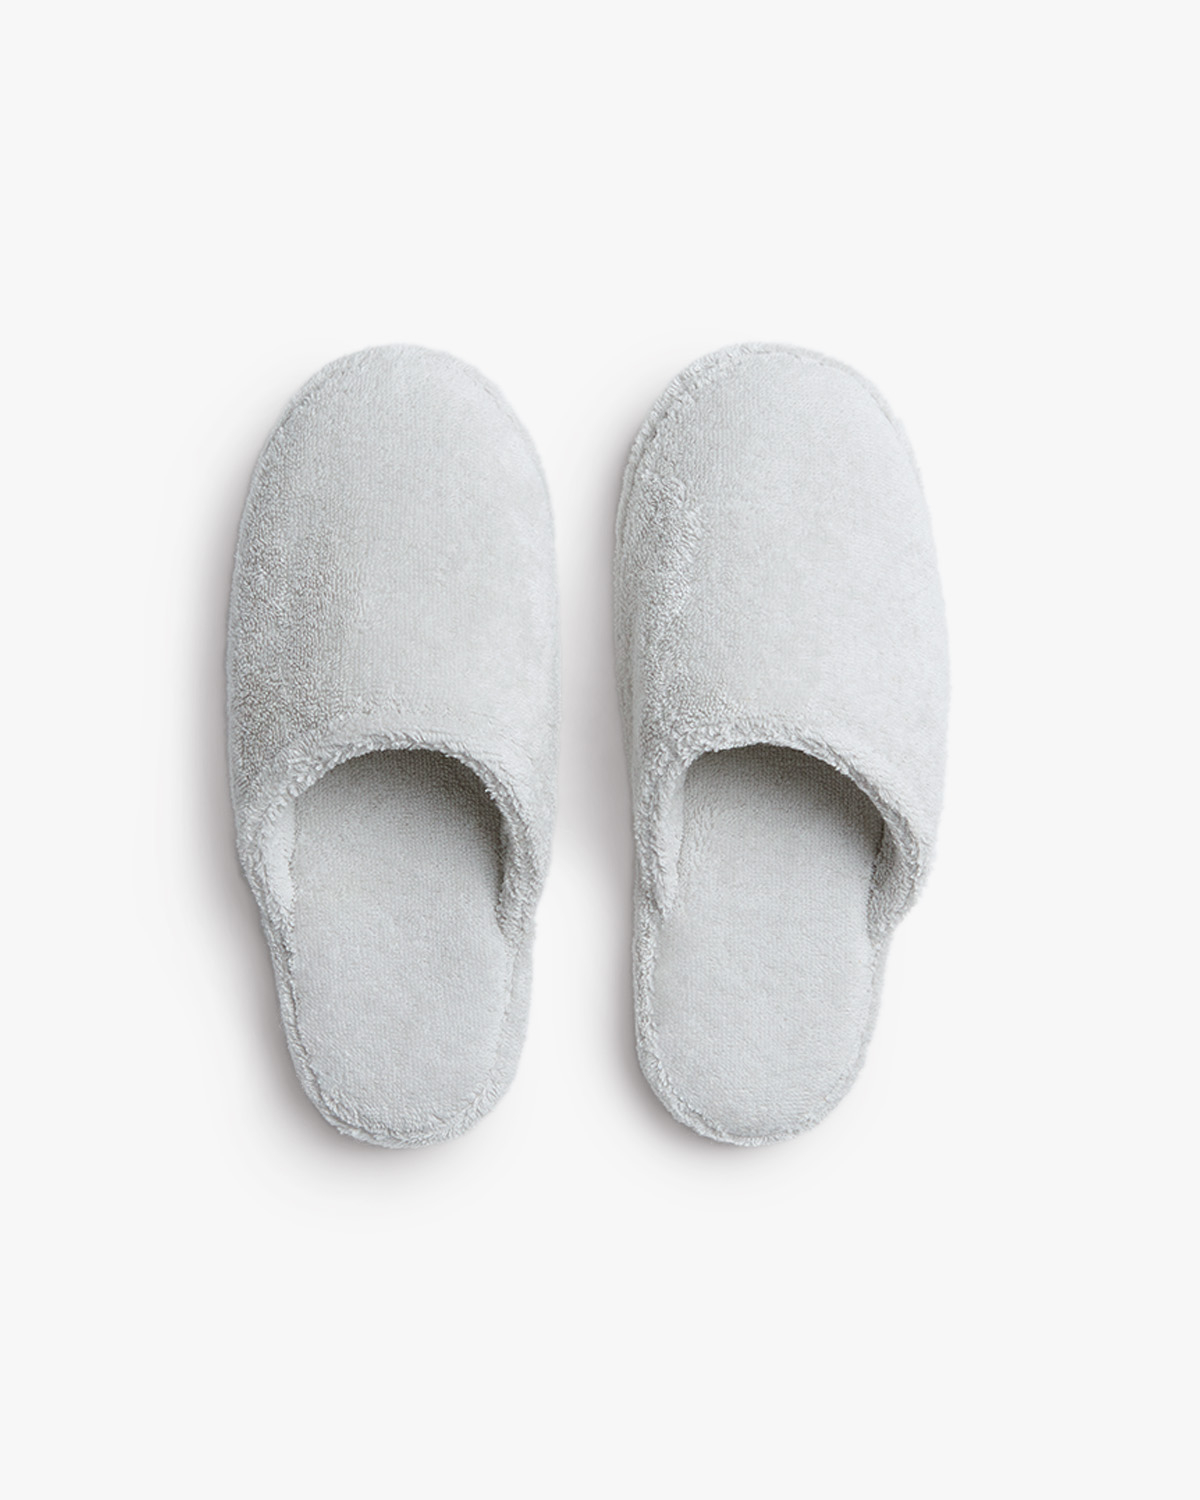 Indoor House Slipper Soft Plush Cotton Cute Slippers Shoes Non-Slip Floor  Home Furry Slippers Women Shoes For Bedroom - Walmart.com